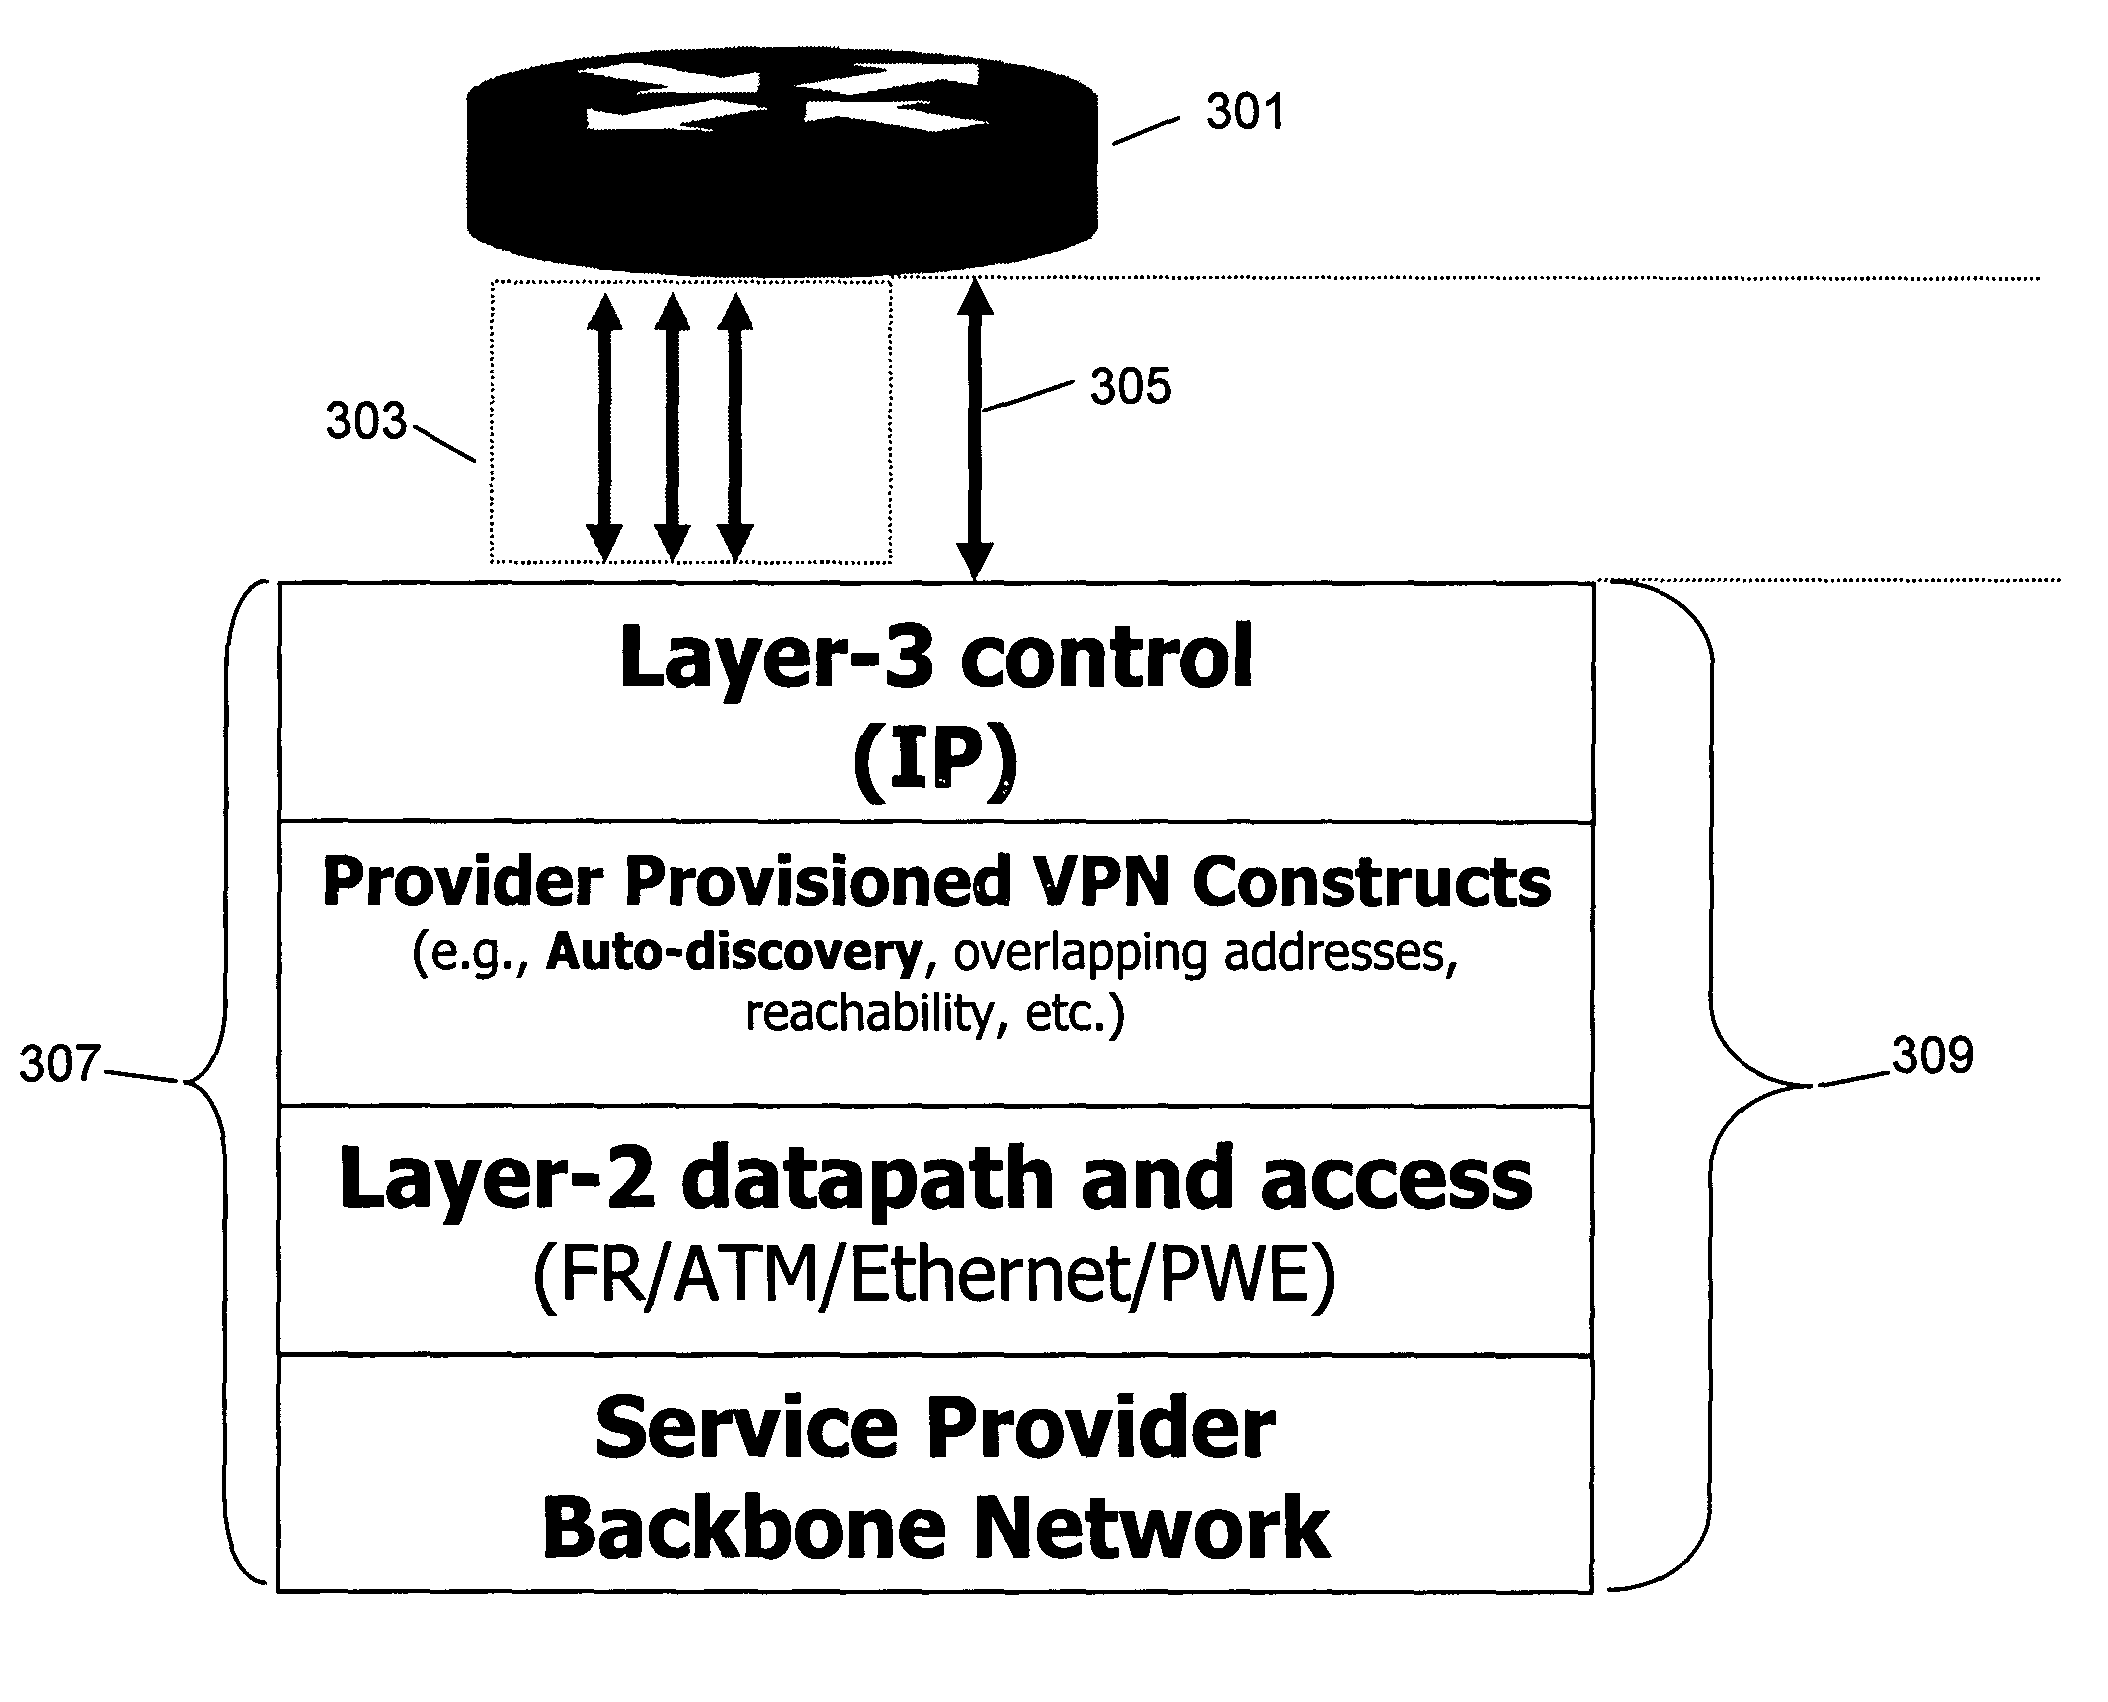 SVC-L2.5 VPNs: combining Layer-3 VPNs technology with switched MPLS/IP L2VPNs for ethernet, ATM and frame relay circuits